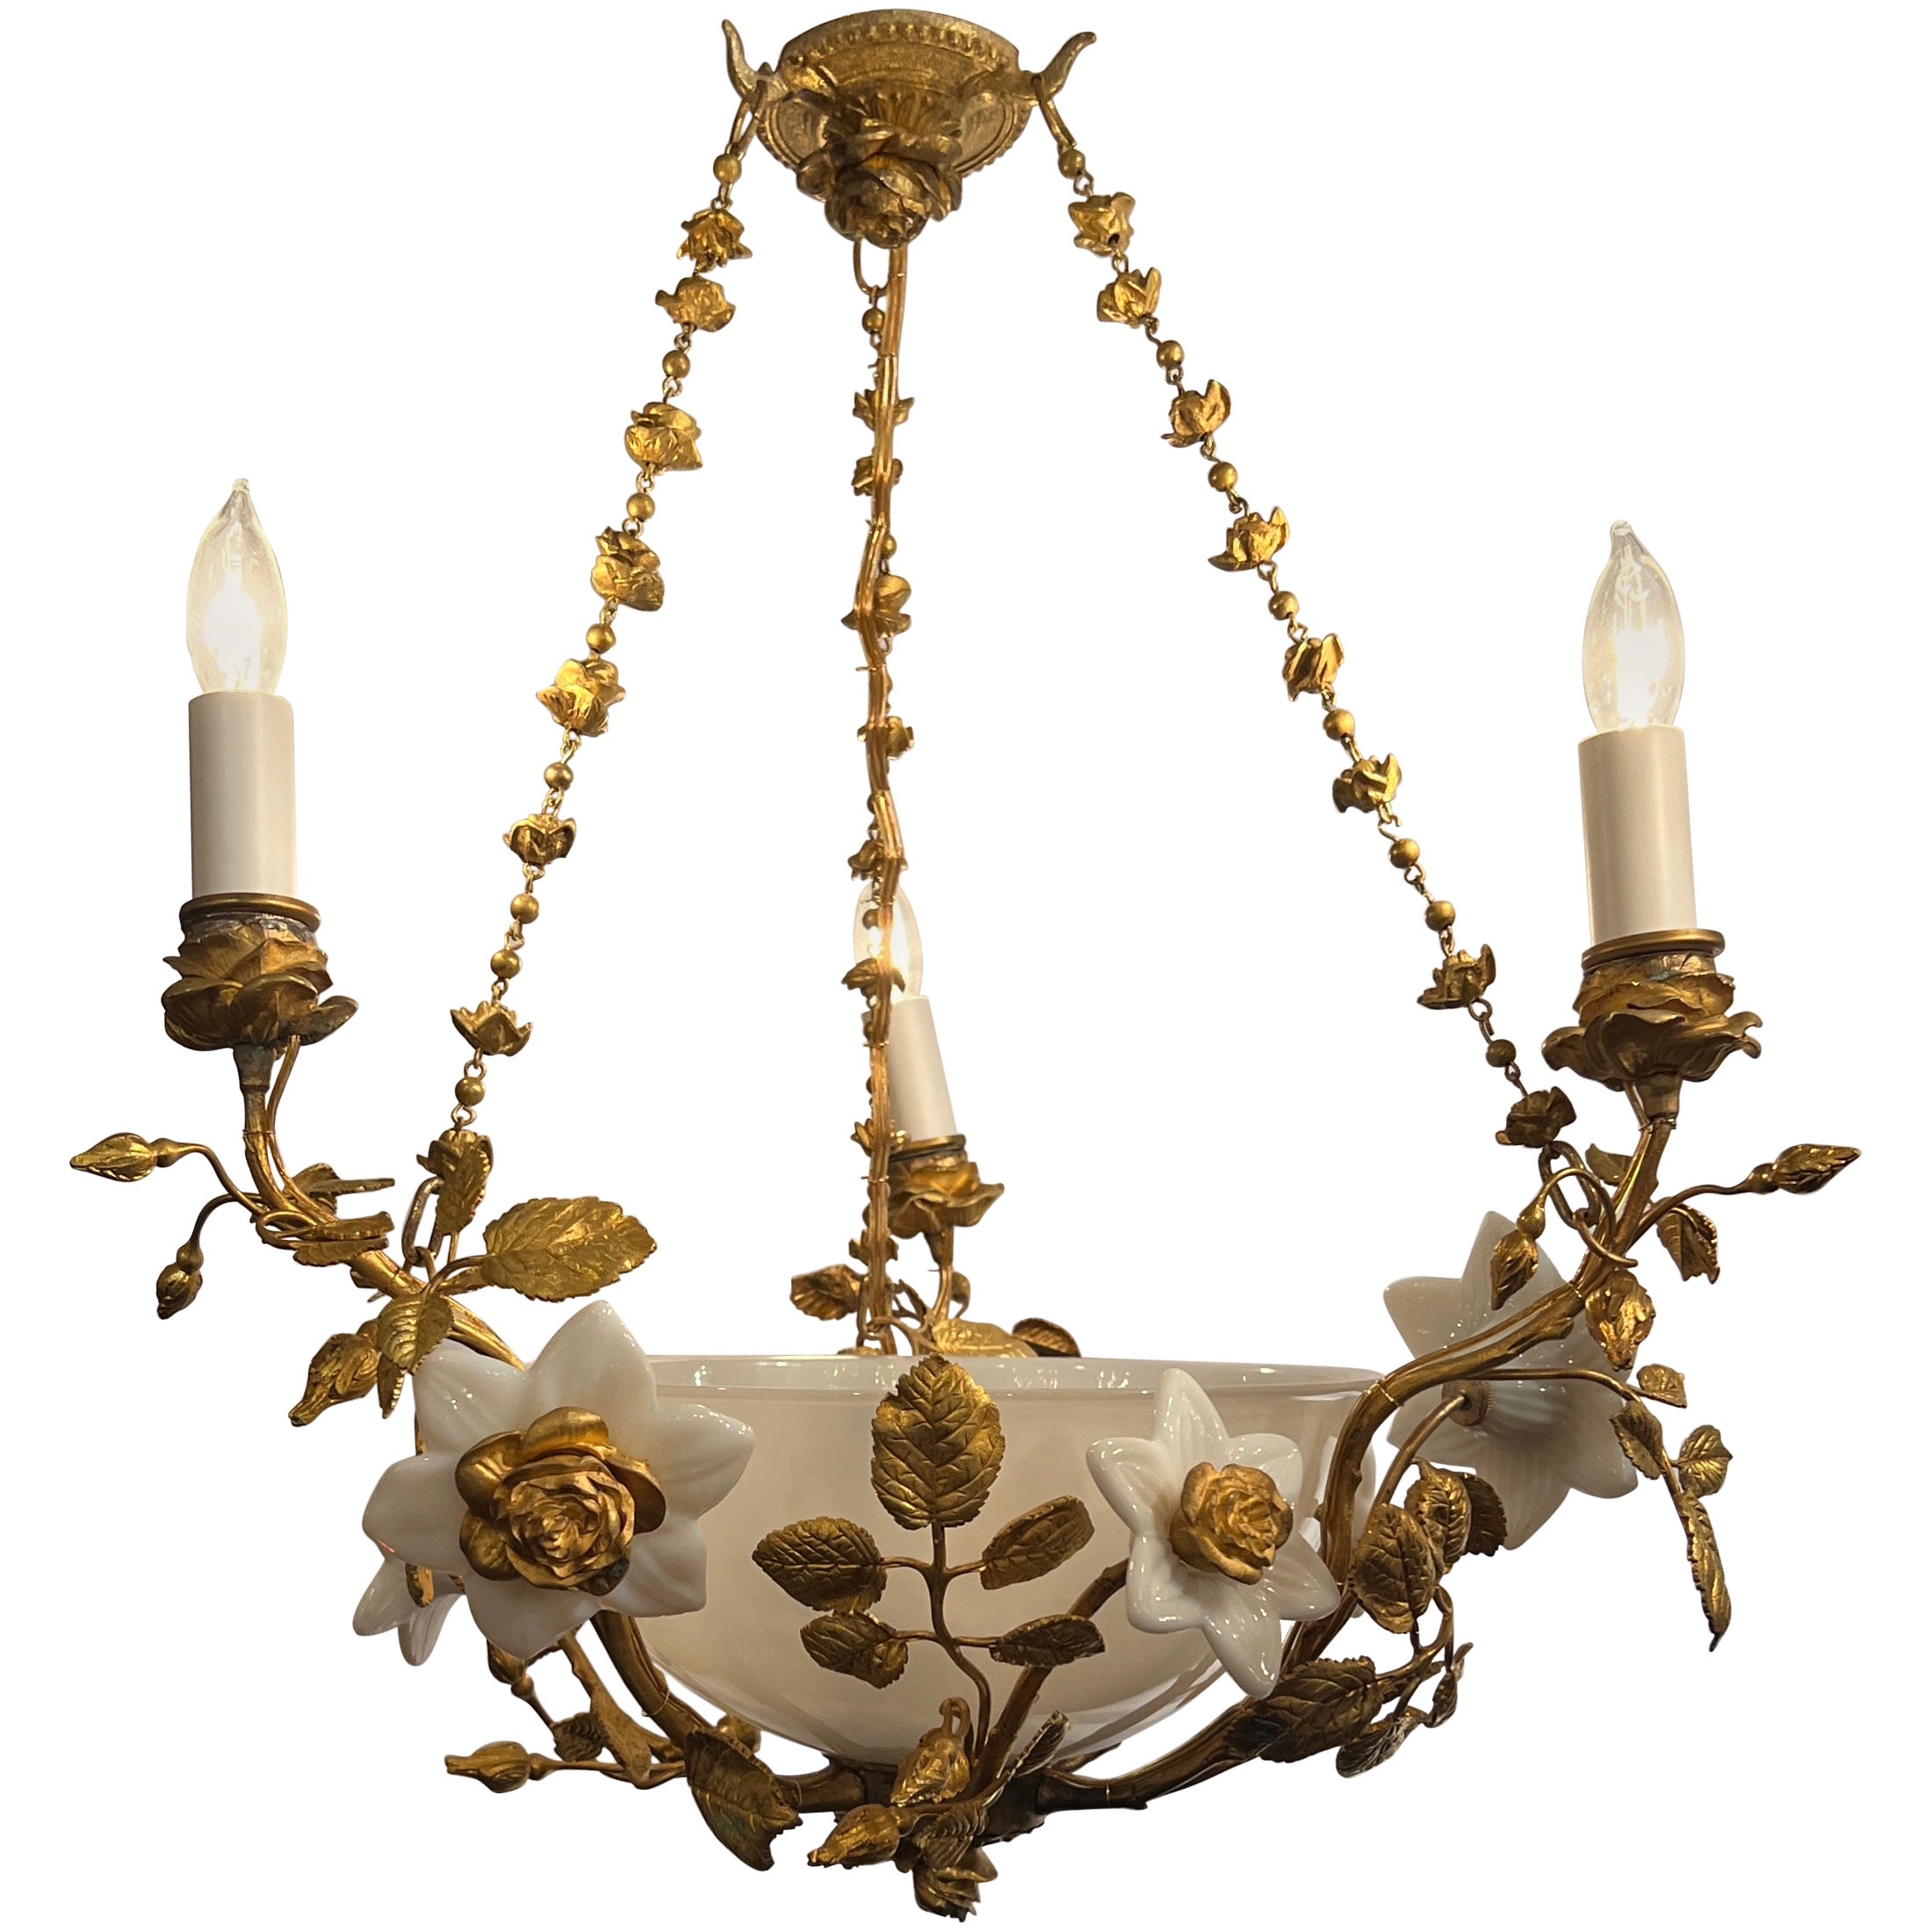 Antique French Charming Milk Glass Fixture with Gold Bronze Flowers, Circa 1900s